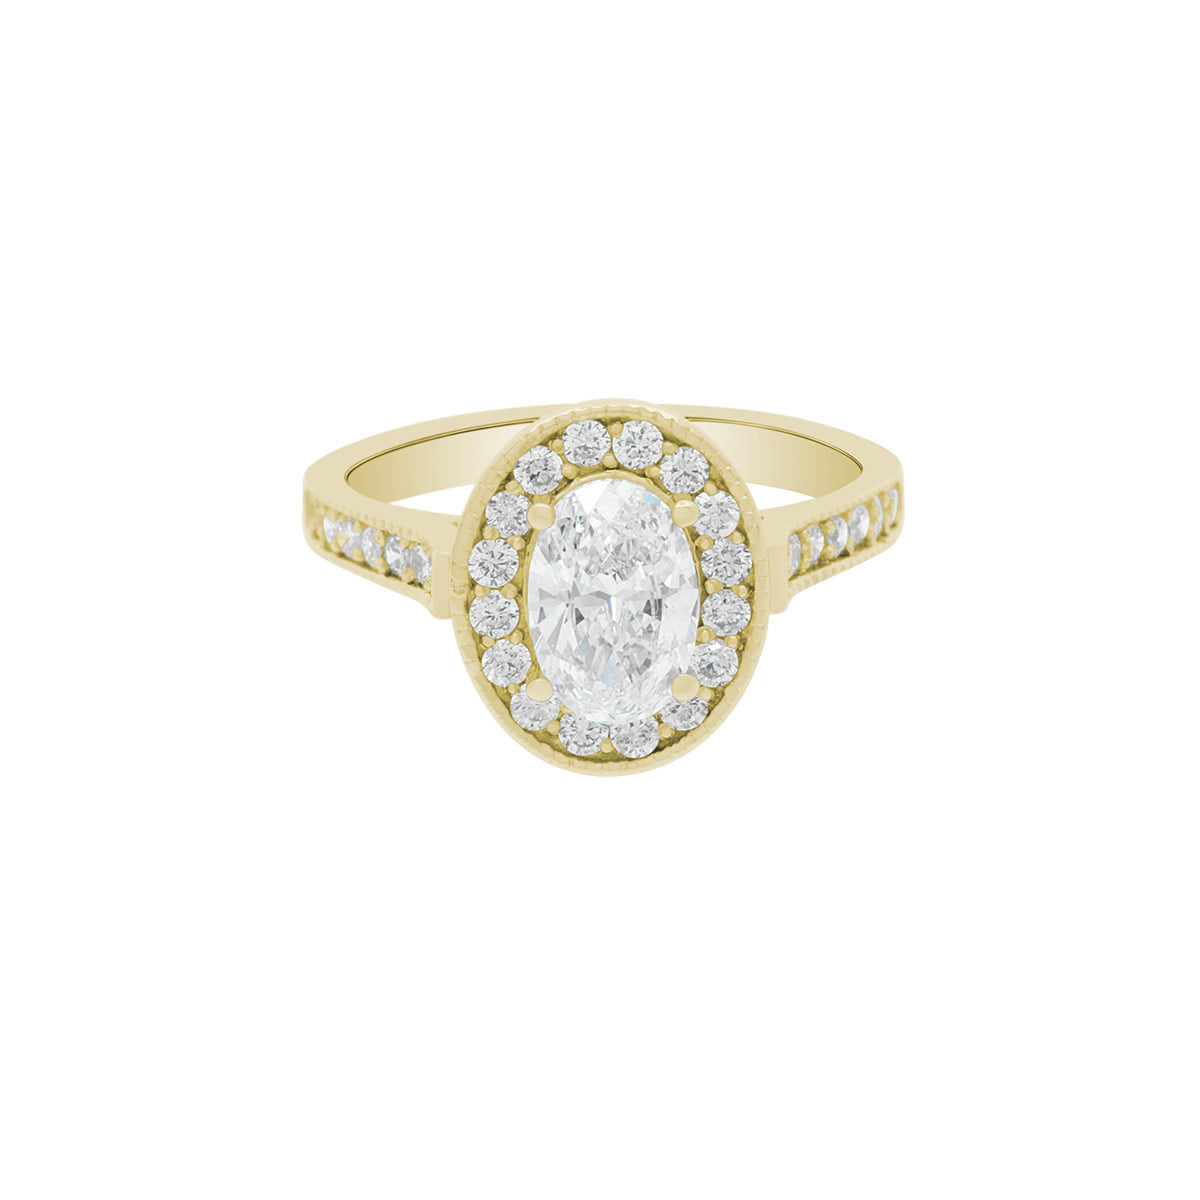 Antique Oval Engagement Ring in Yellow gold